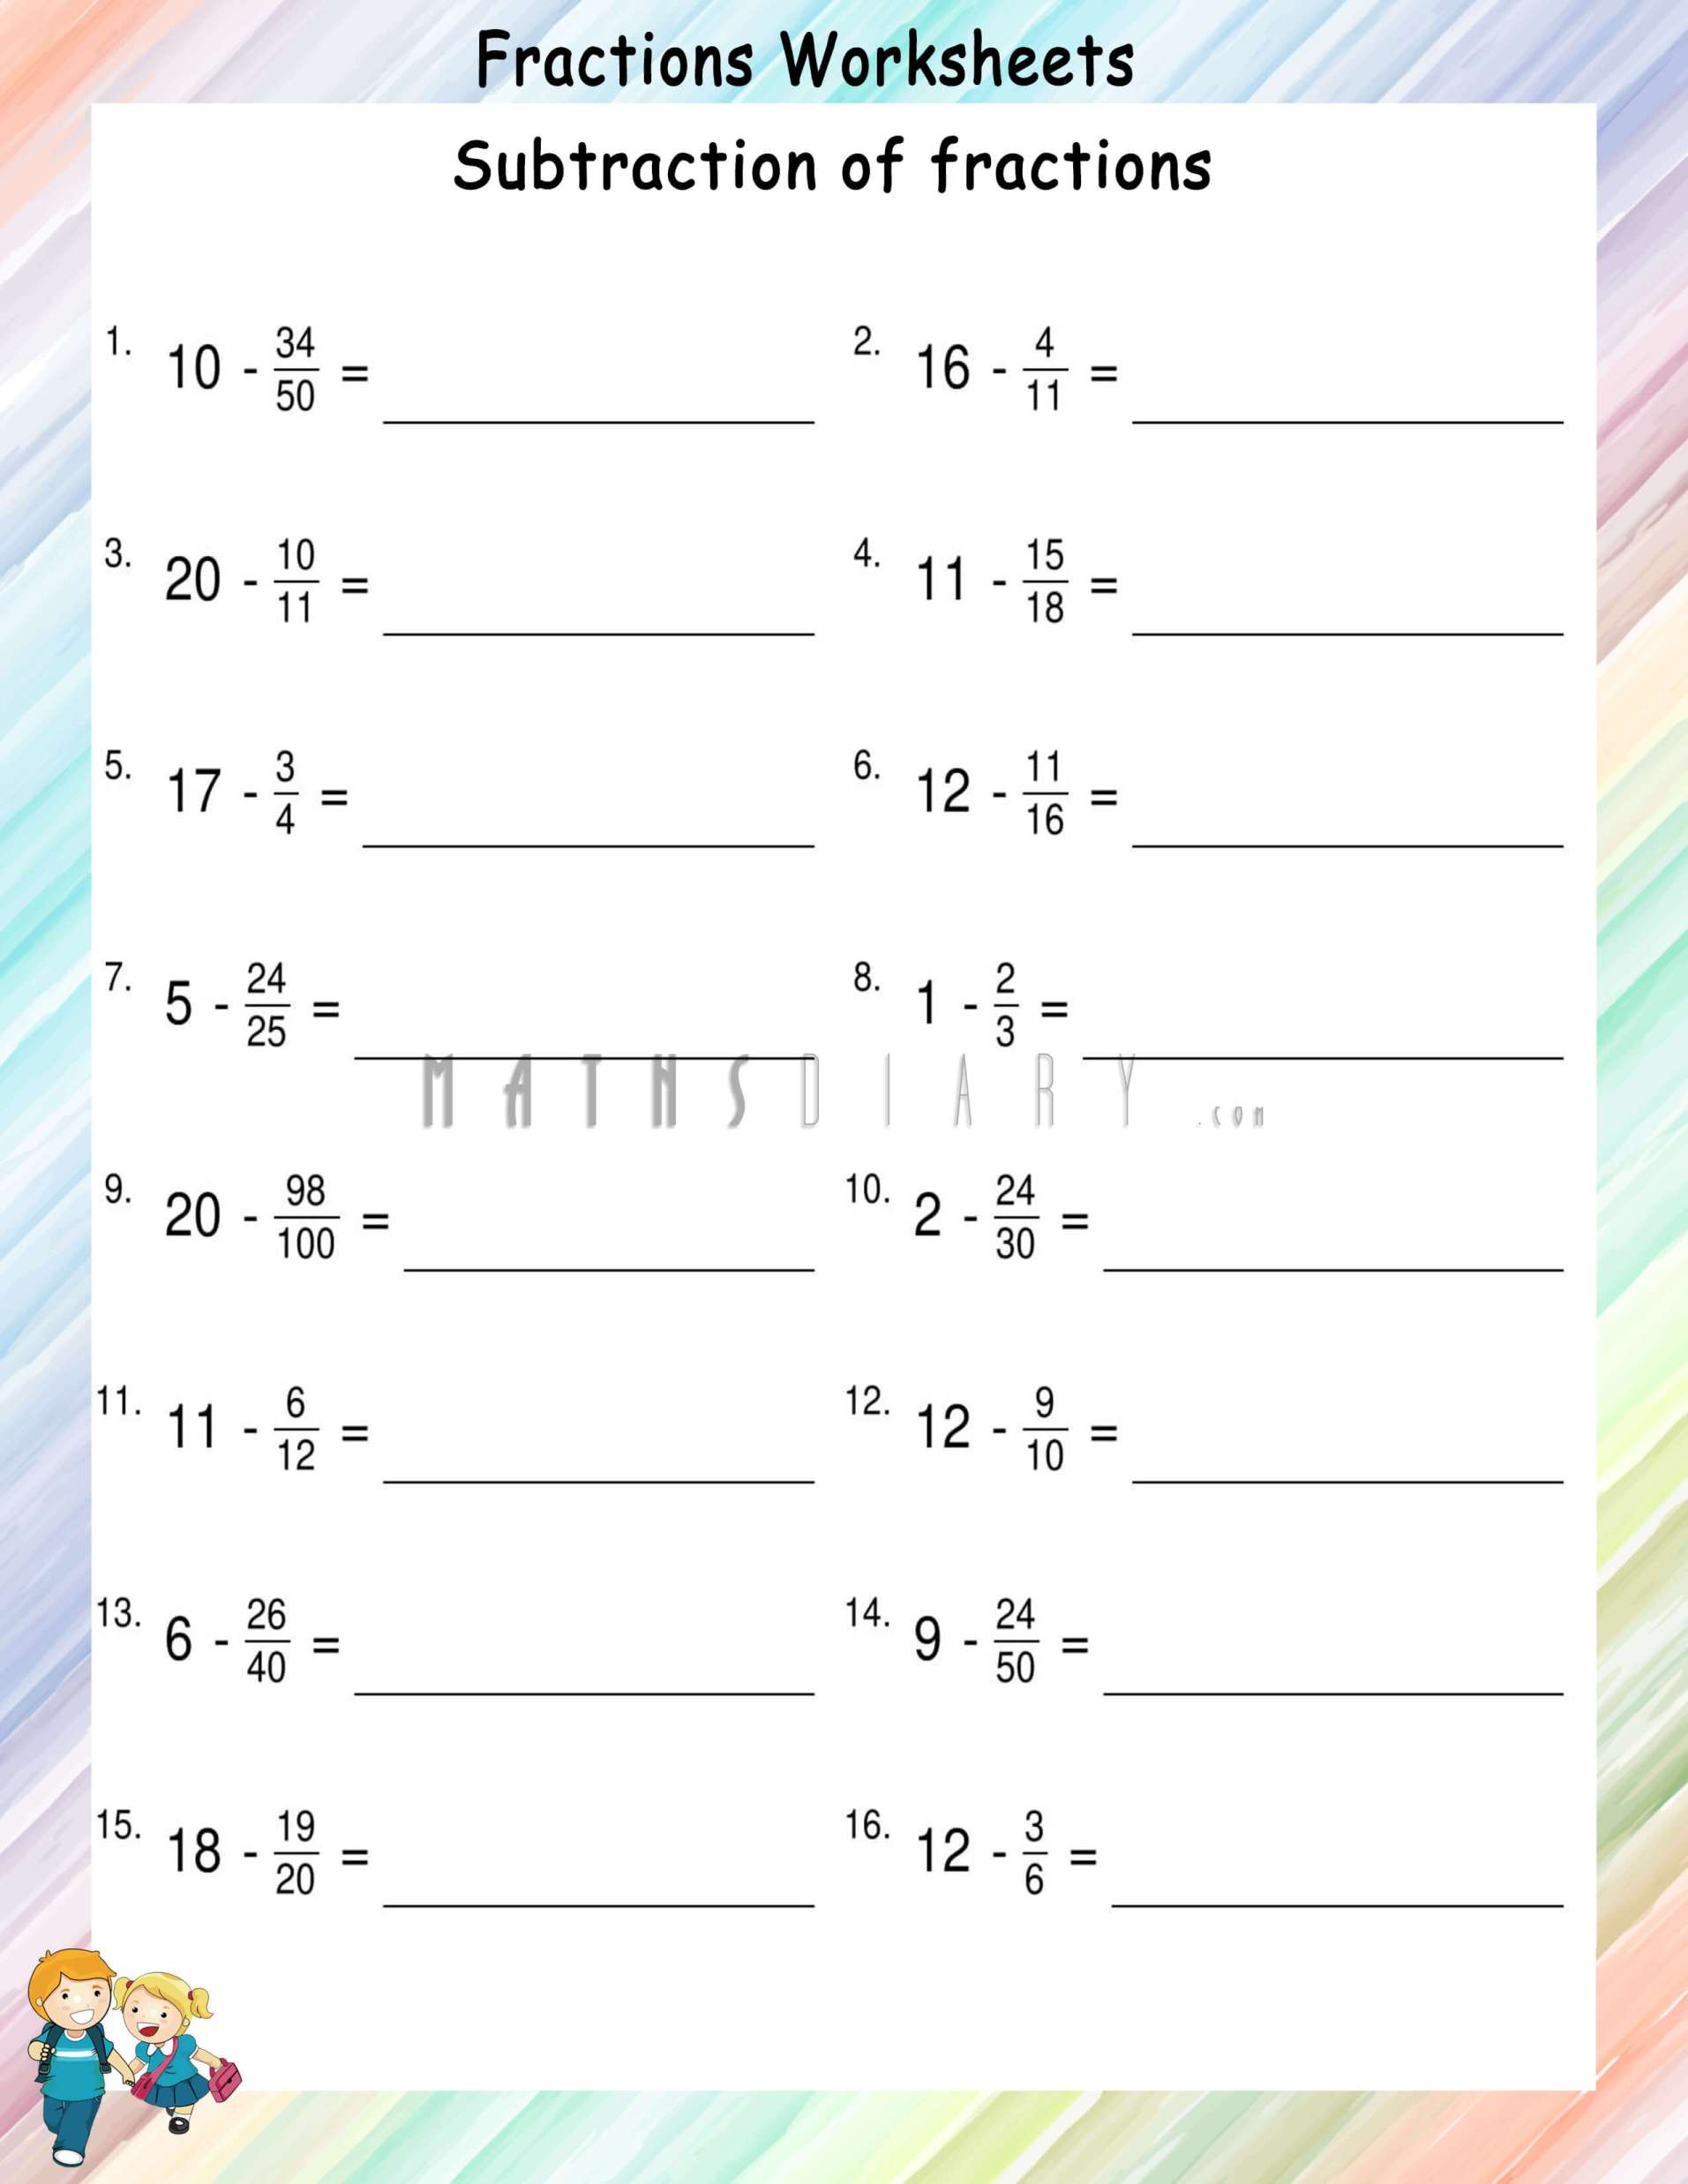 Subtracting fractions from whole numbers Math Worksheets MathsDiary com